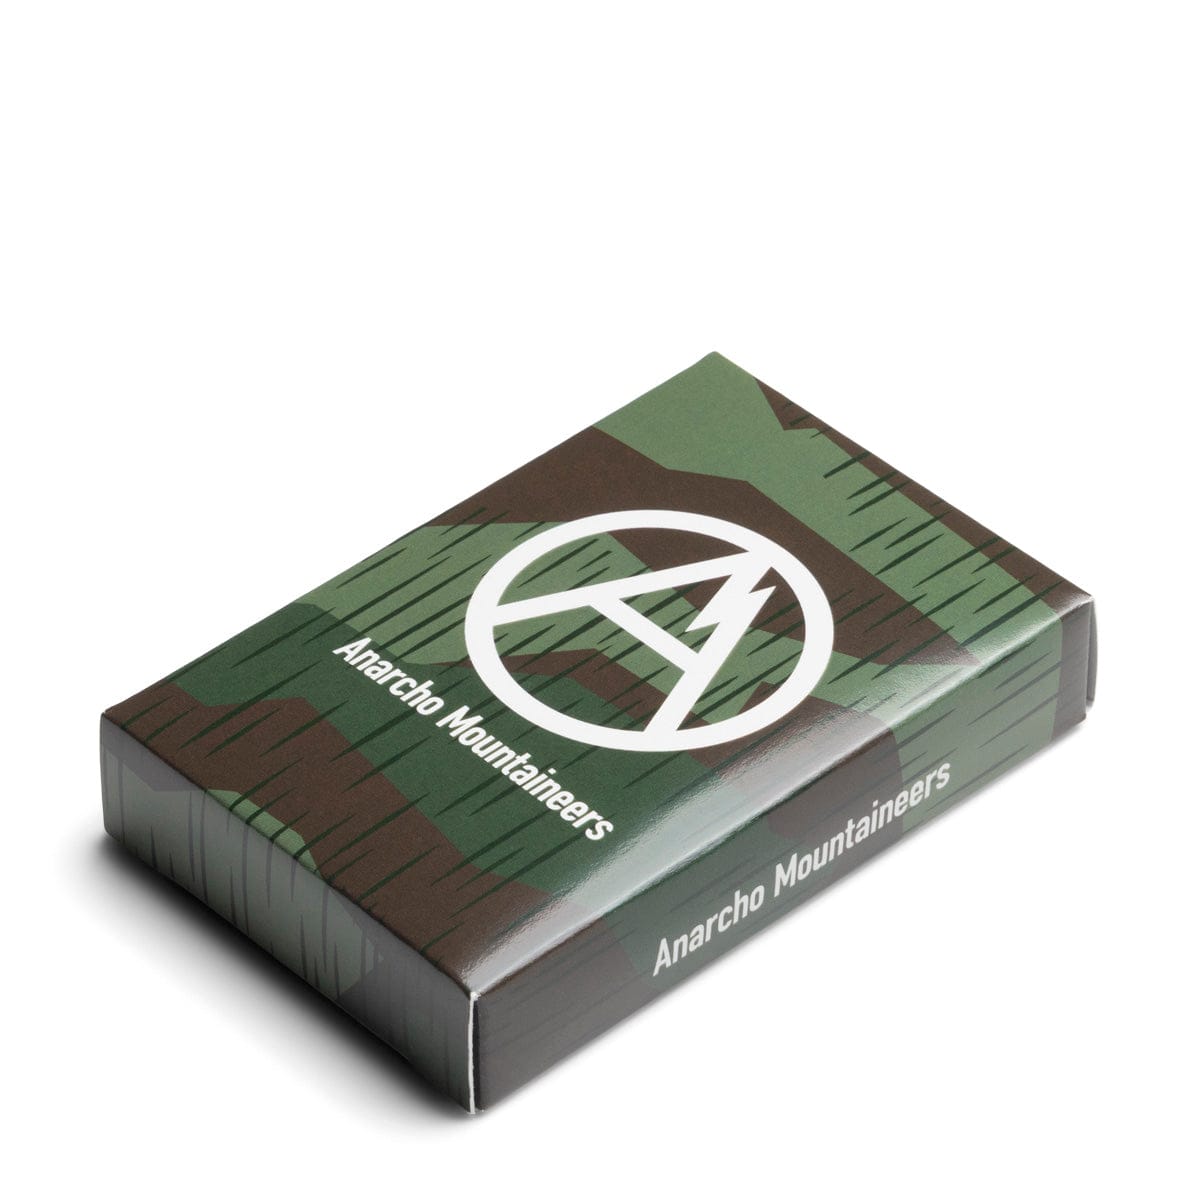 Mountain Research Odds & Ends CAMO / O/S PLAYING CARDS